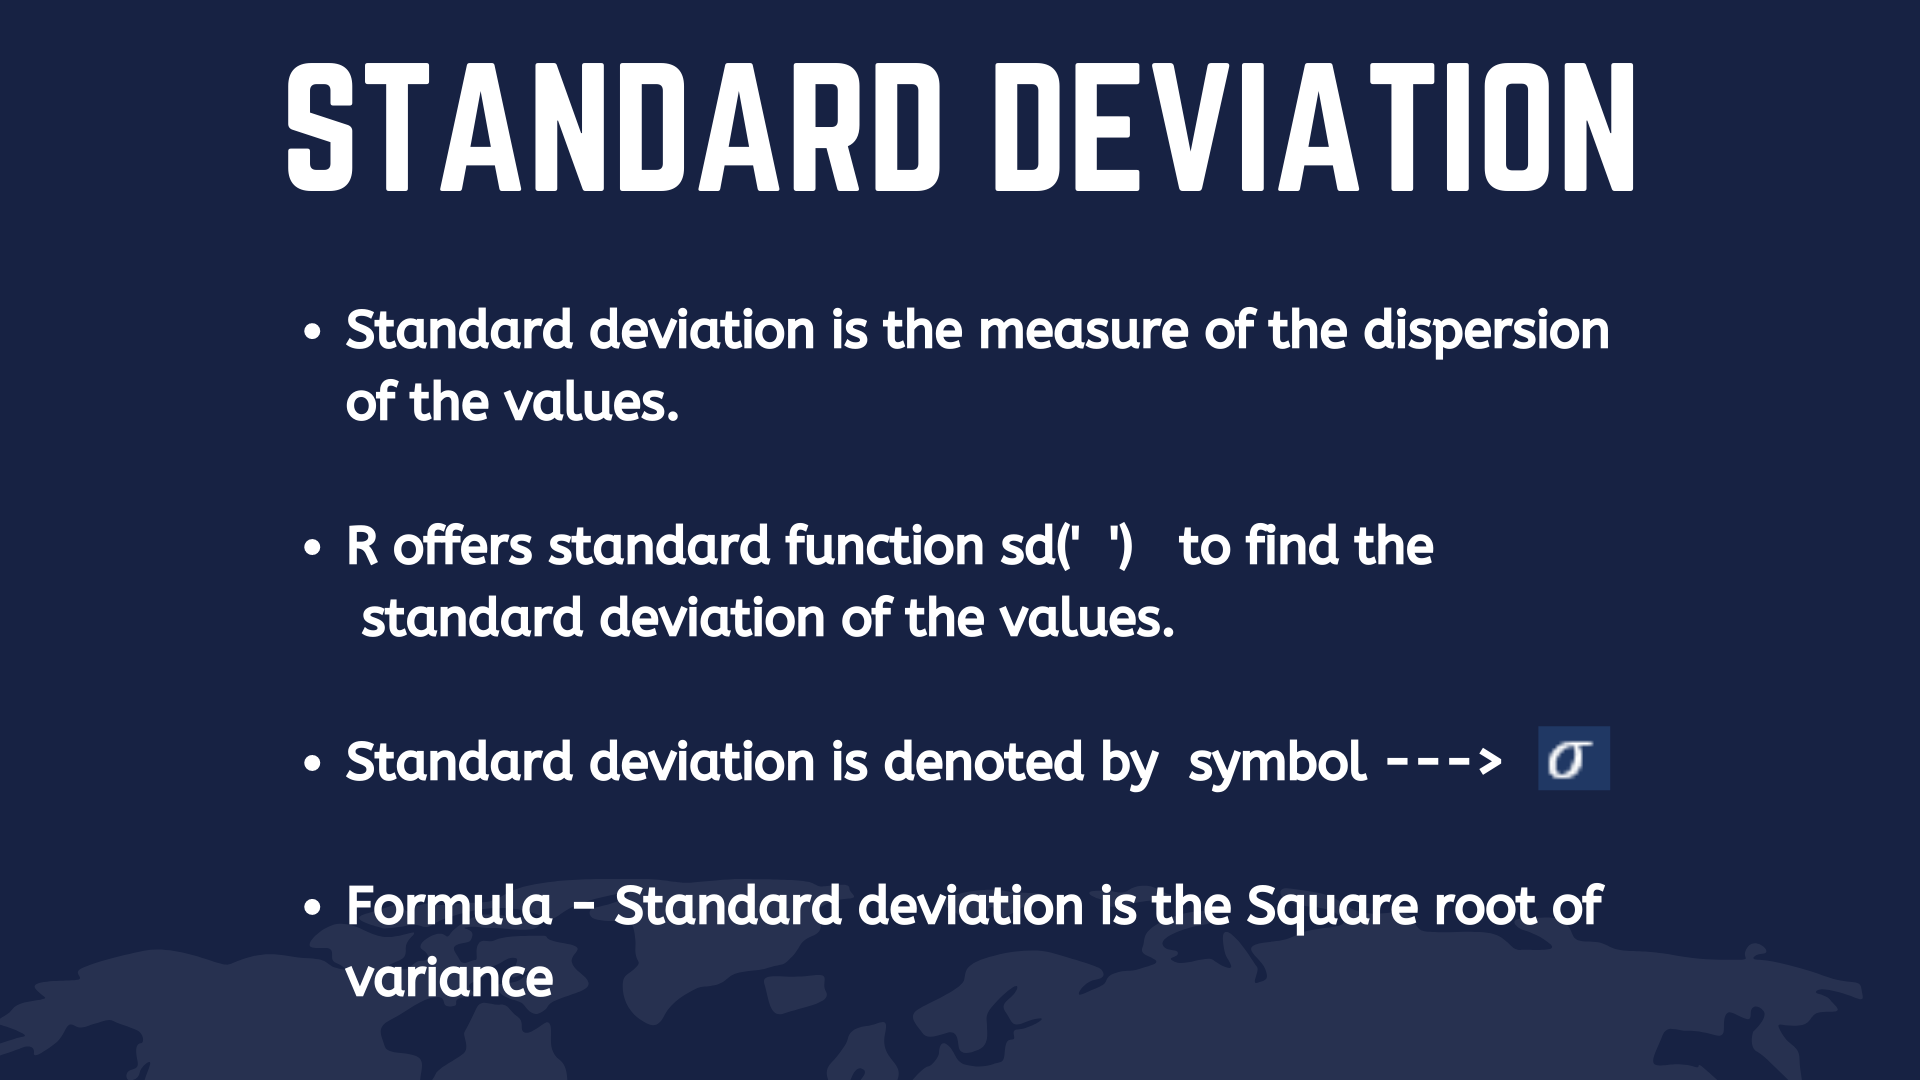 How to Find Standard Deviation in R?